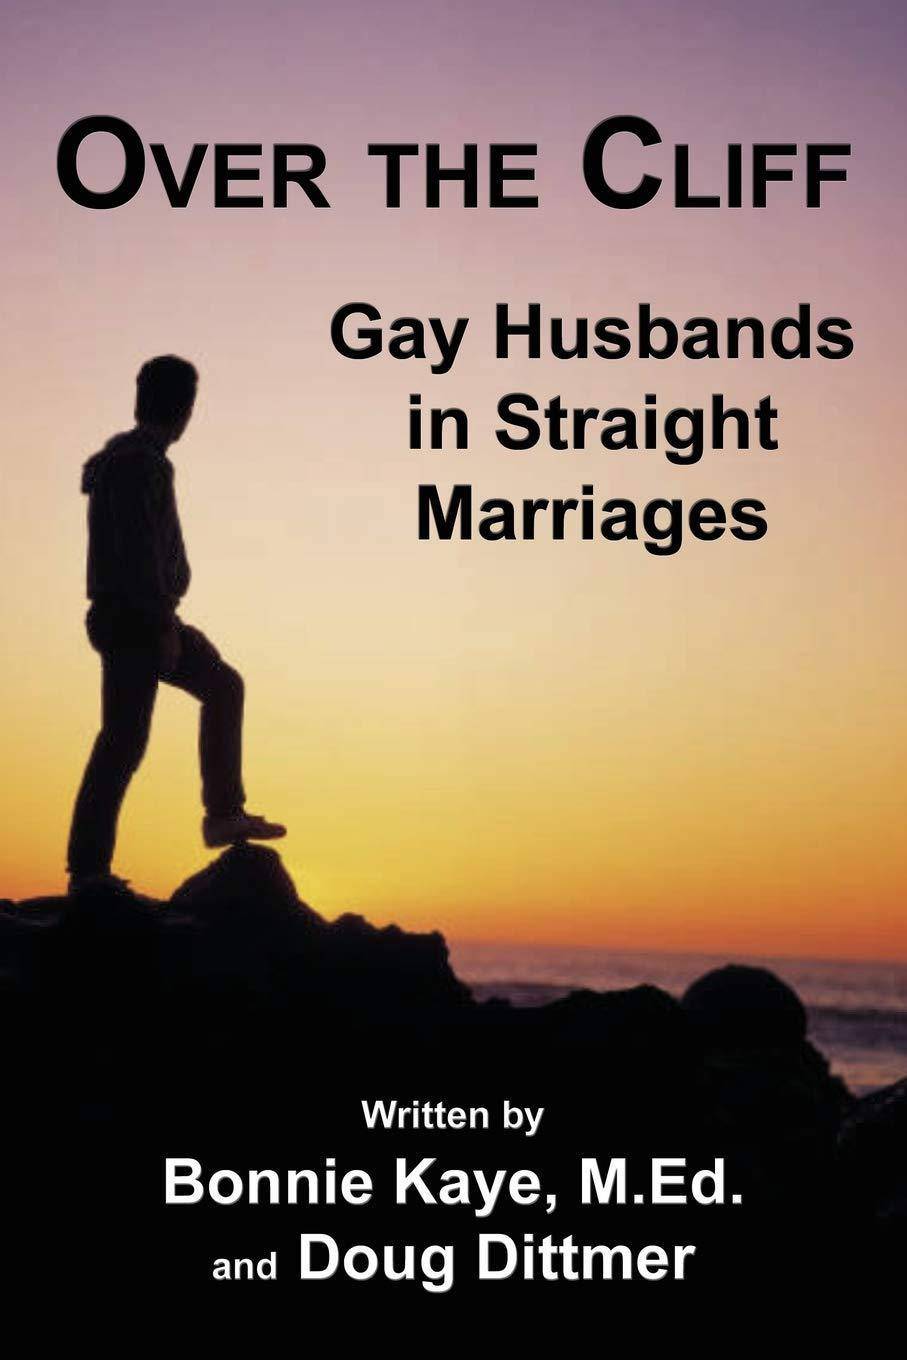 Over the Cliff: Gay Husbands in Straight Marriages - SureShot Books Publishing LLC